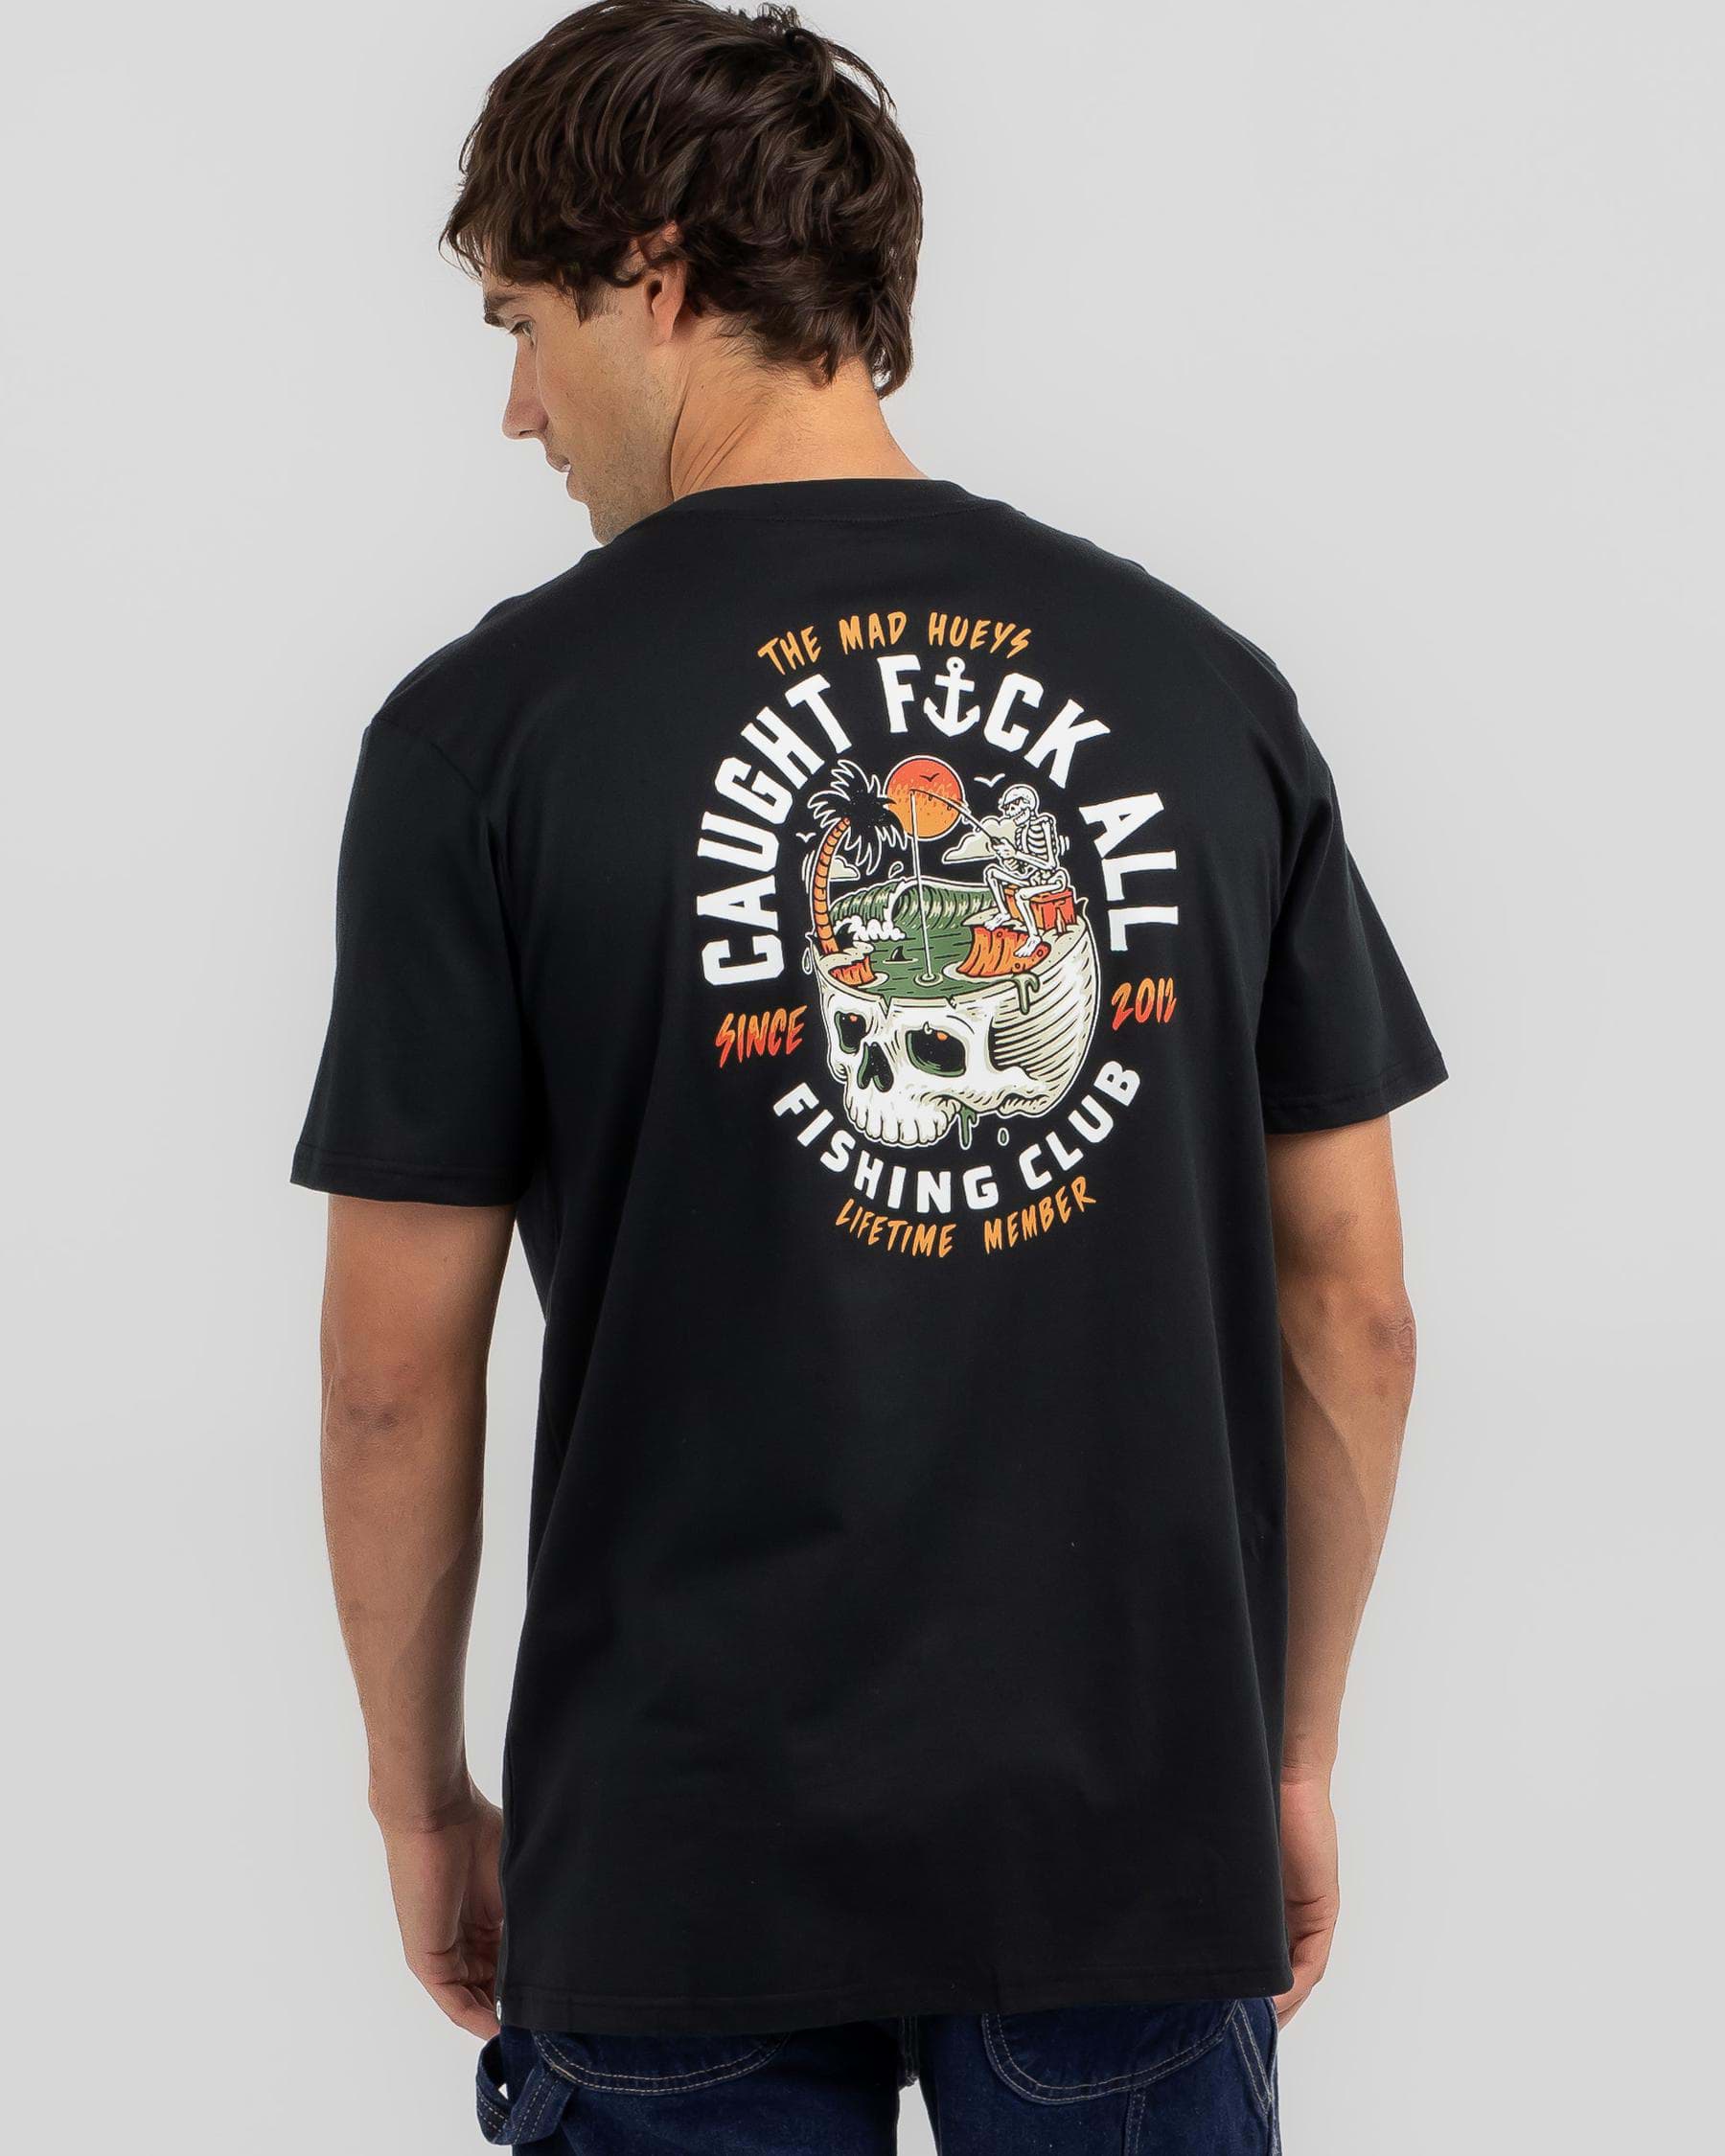 The Mad Hueys Still Caught Fk All T-Shirt In Black - FREE* Shipping ...